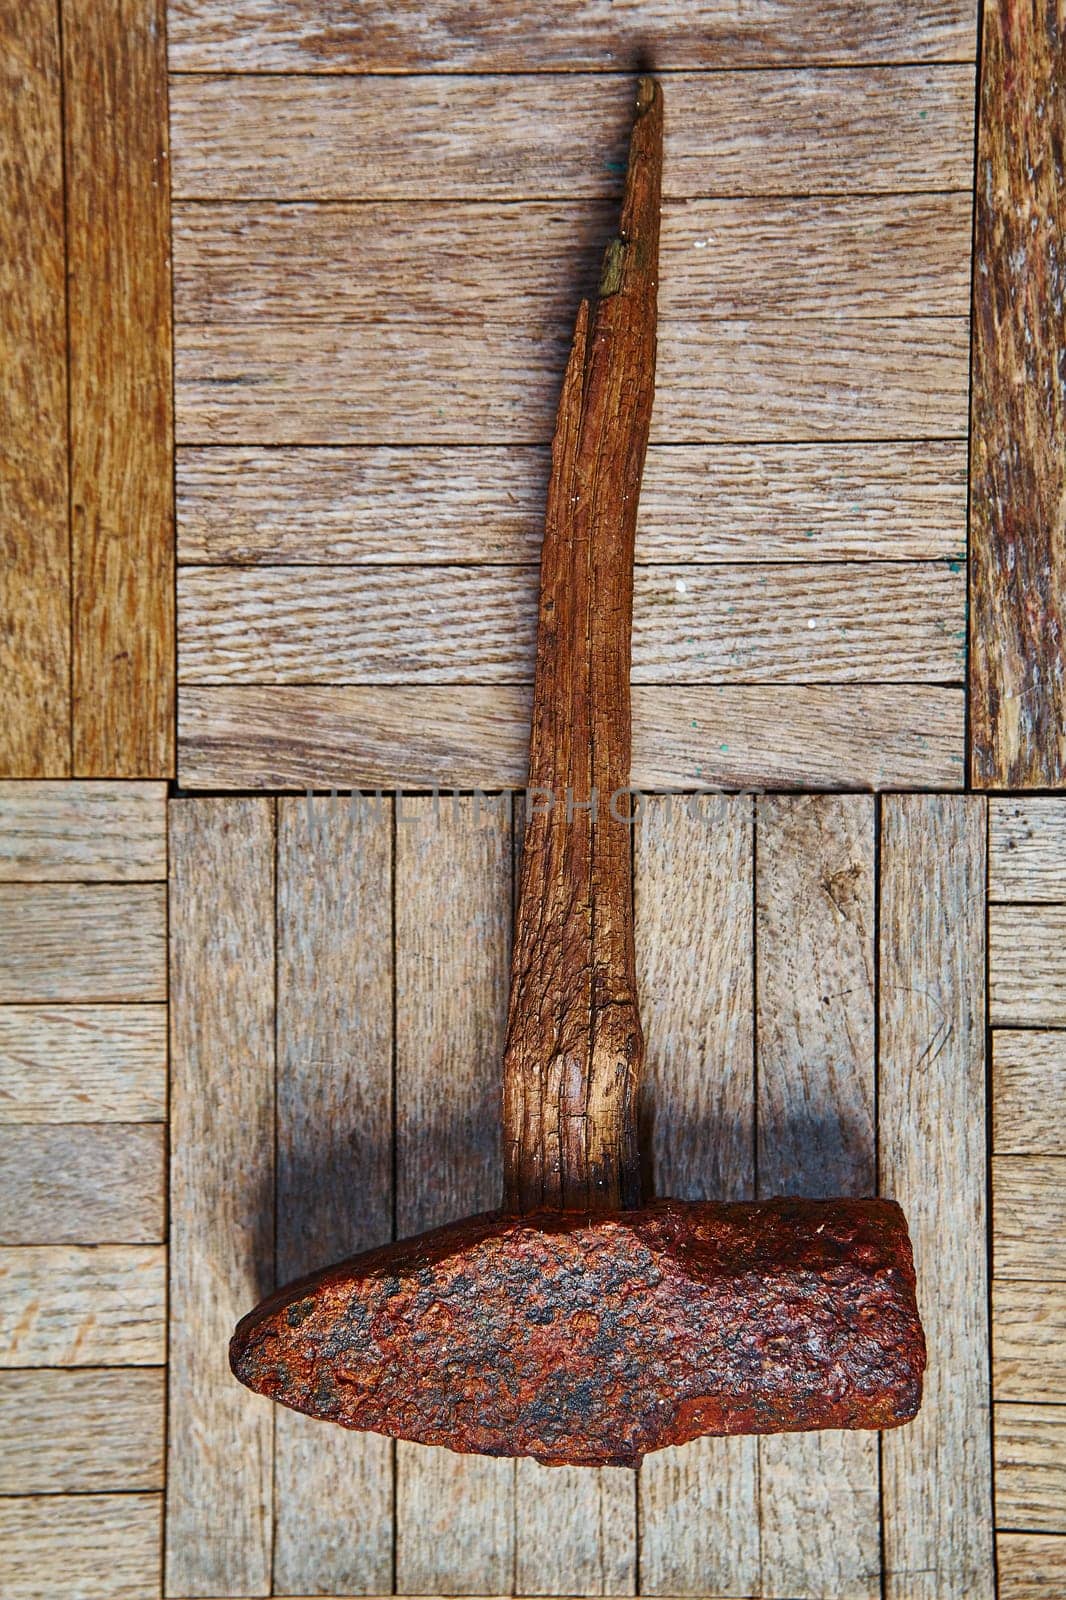 Rustic Aged Hammer Against Weathered Wooden Planks in Urban Decay Setting by njproductions